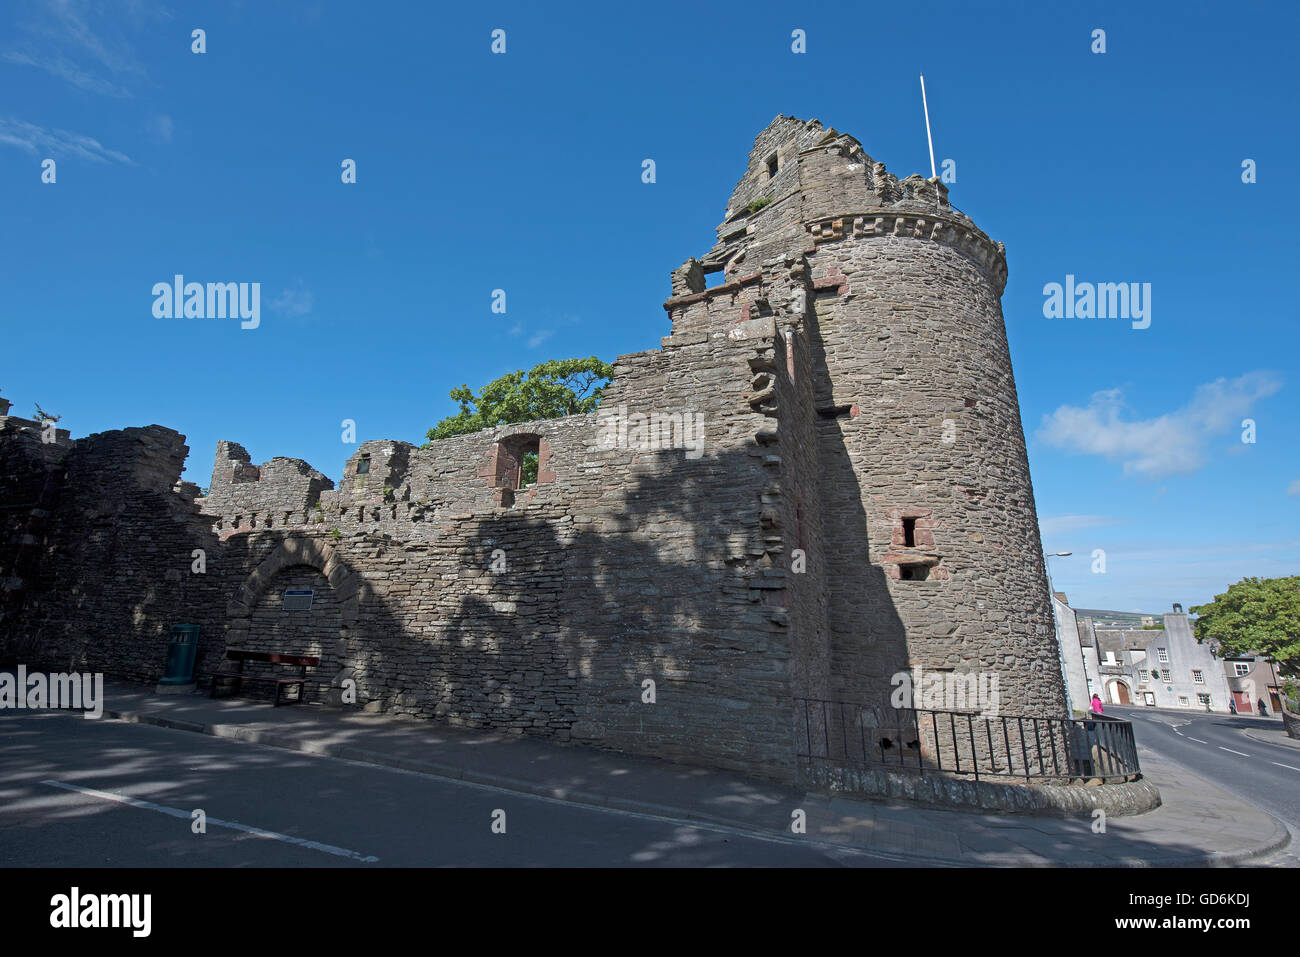 The 12thC Bishop's Palace Kirkwall Orkney built for Bishop William the Old.  SCO 10,586. Stock Photo